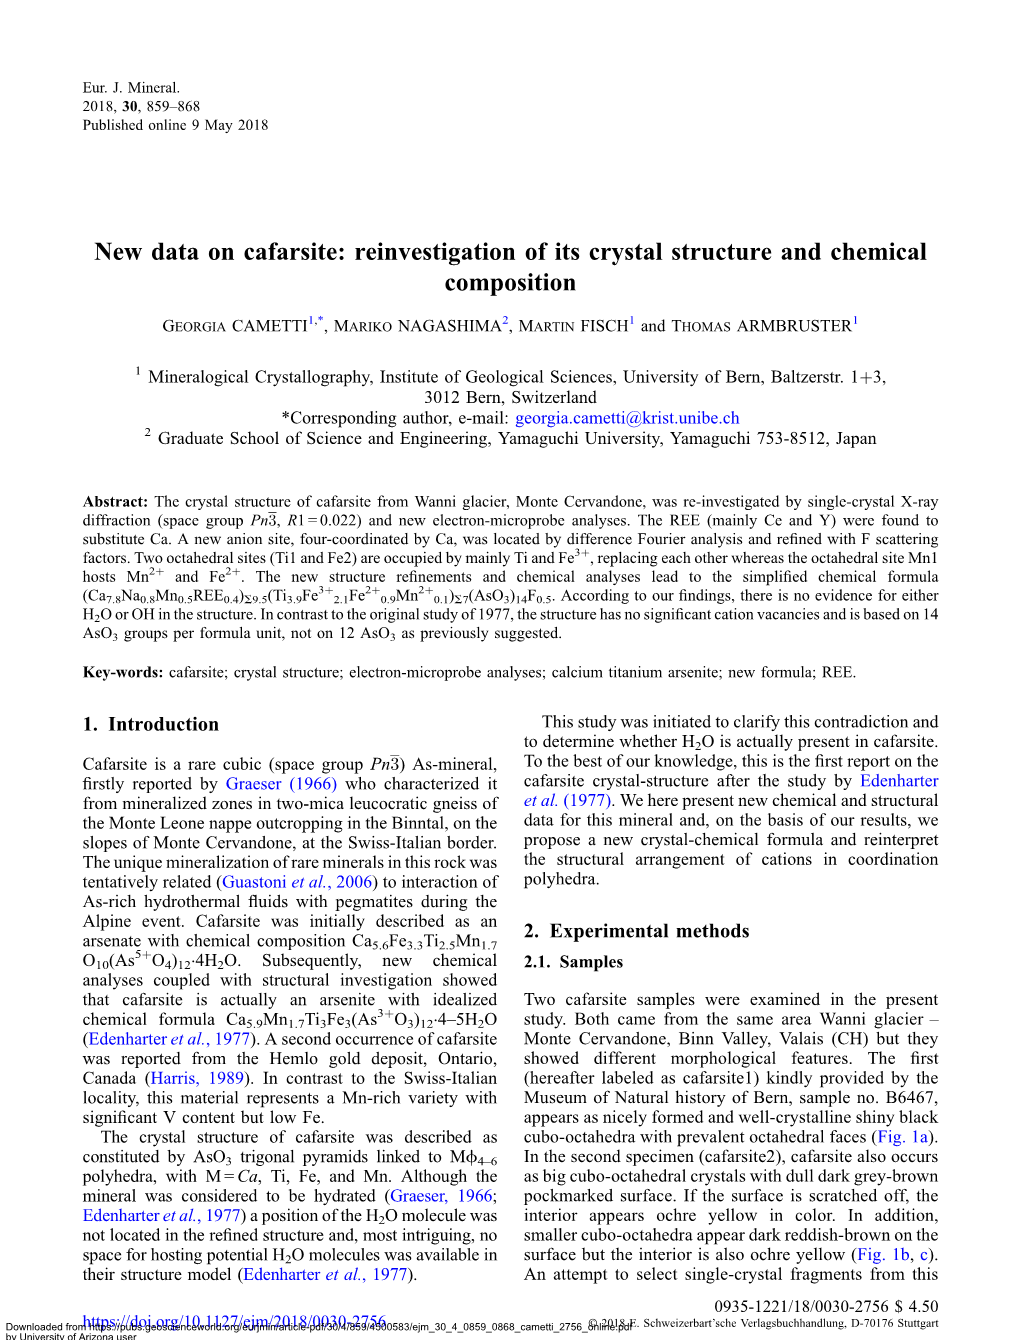 New Data on Cafarsite: Reinvestigation of Its Crystal Structure and Chemical Composition